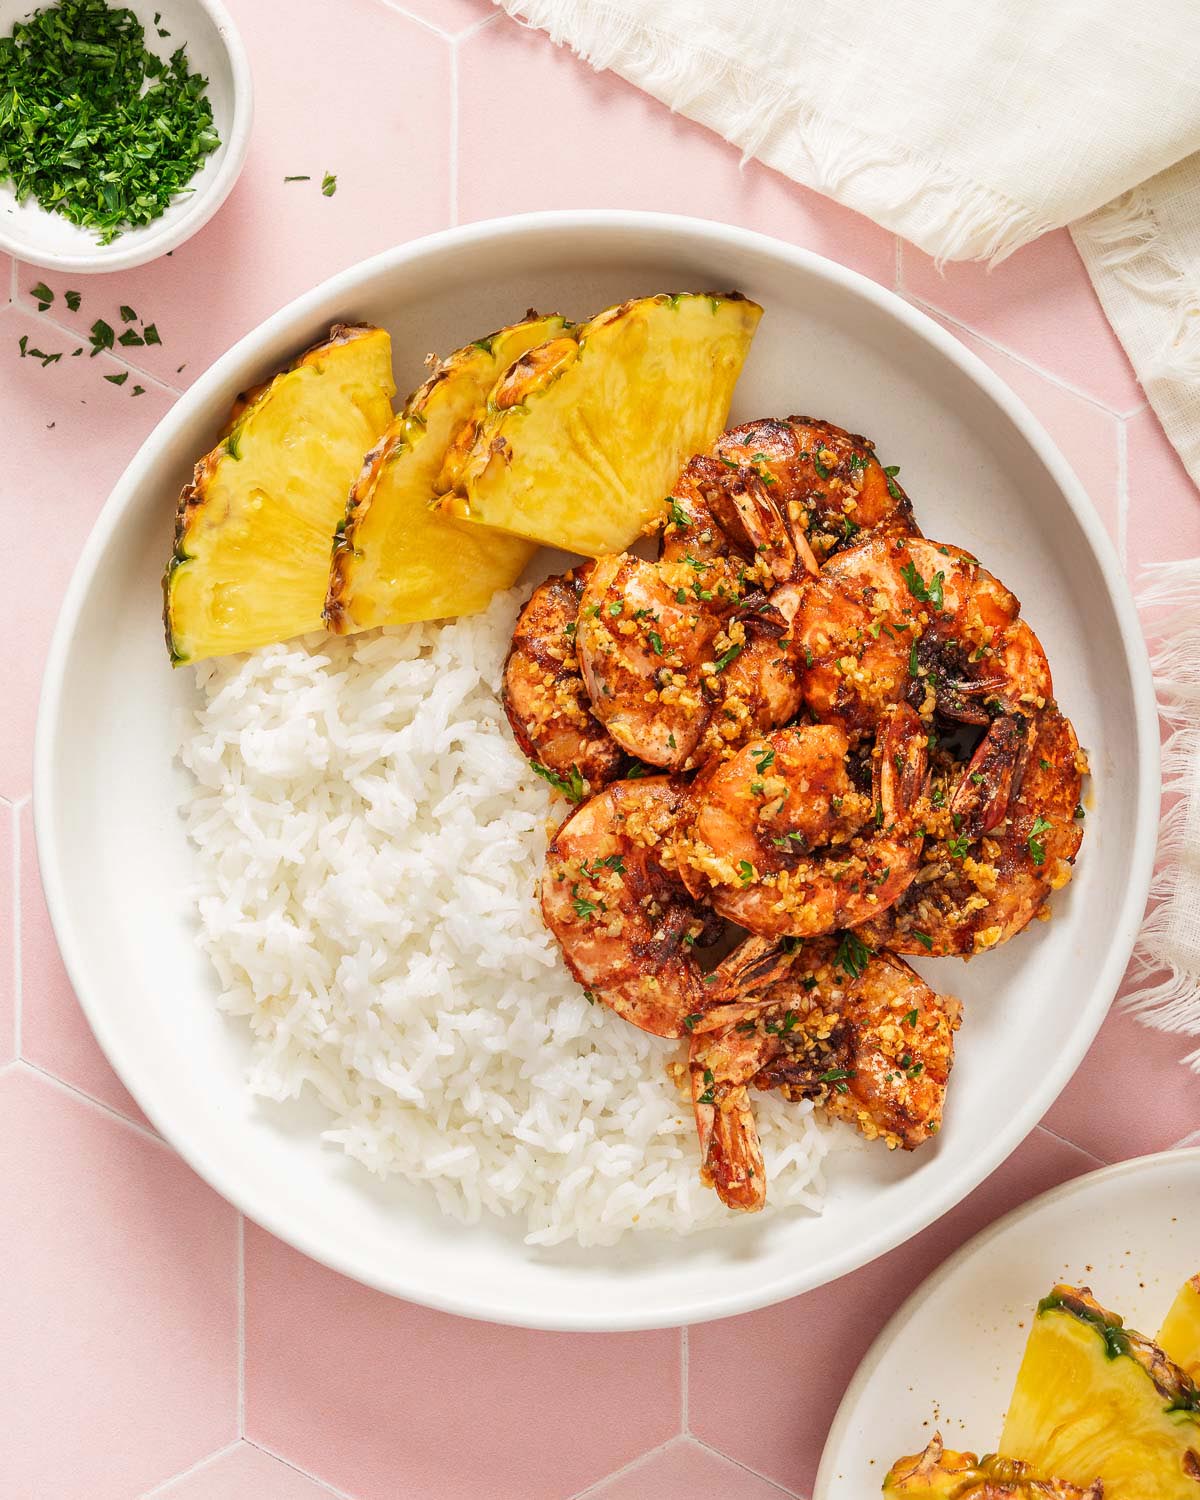 A plate with garlic shrimp, pineapple, and rice.